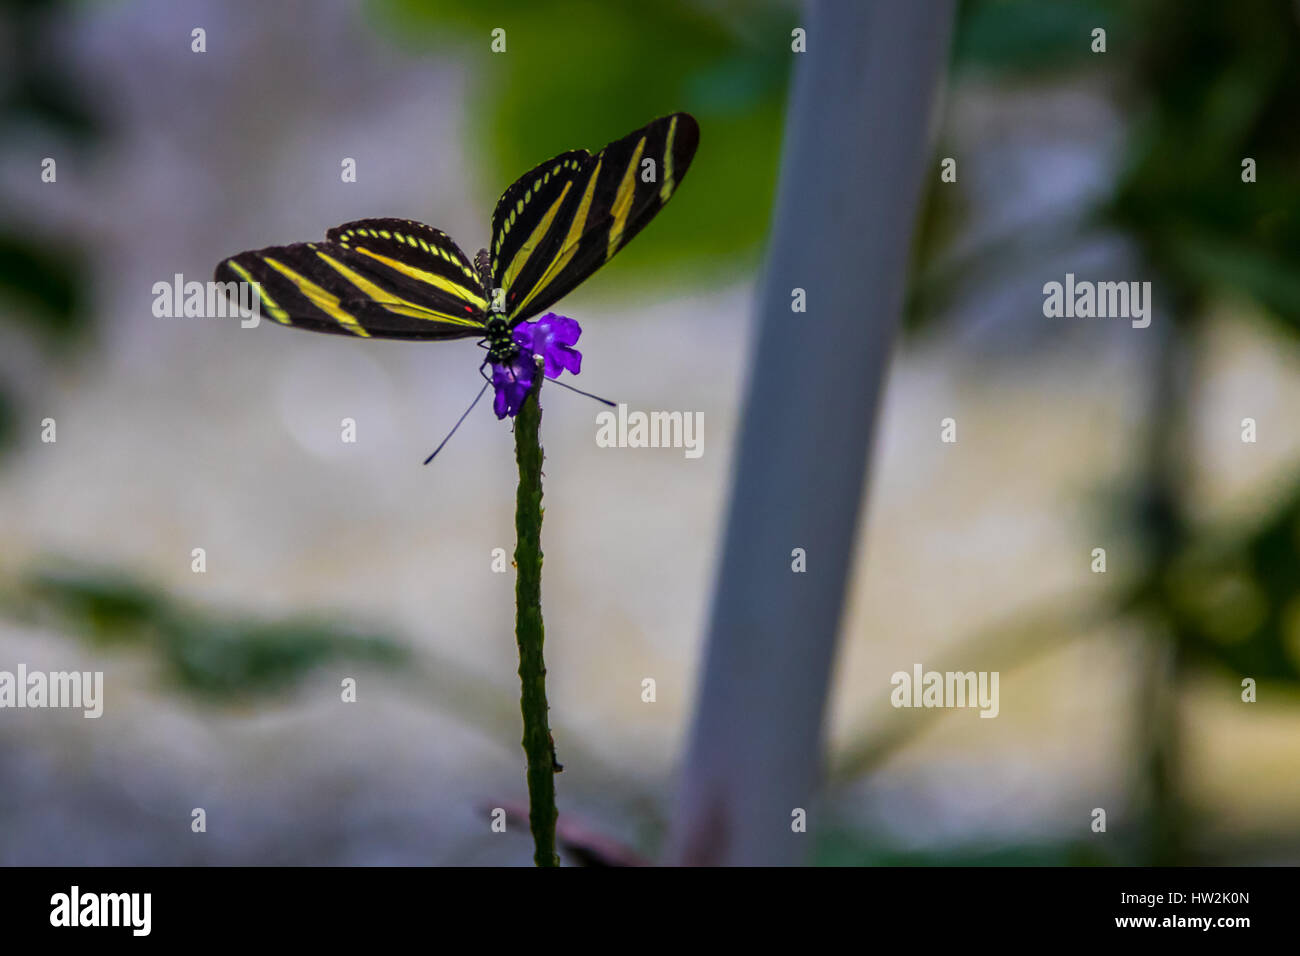 Zebra longwings butterfly (Heliconius charithonia) on a purple flower Stock Photo